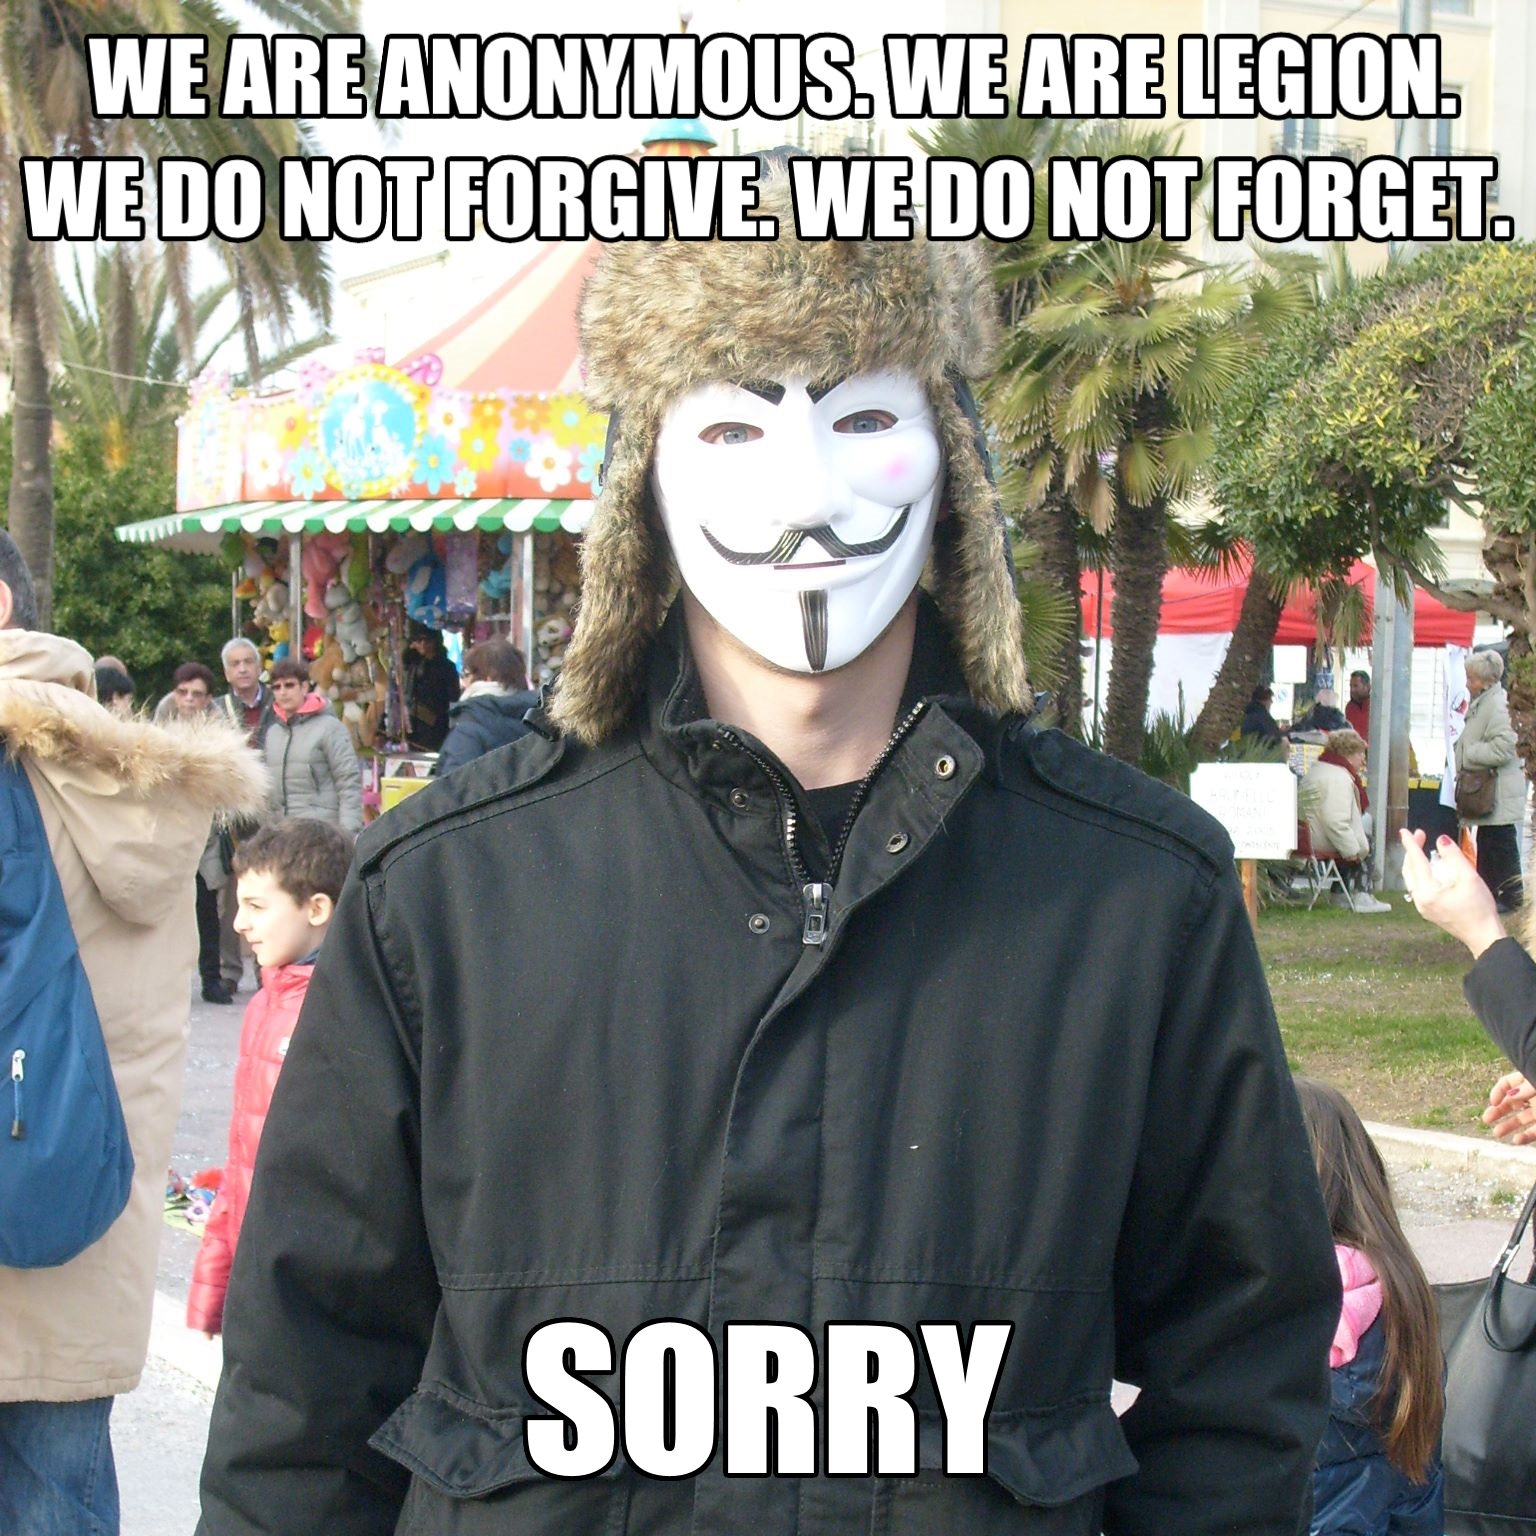 Canadian Anonymous be like